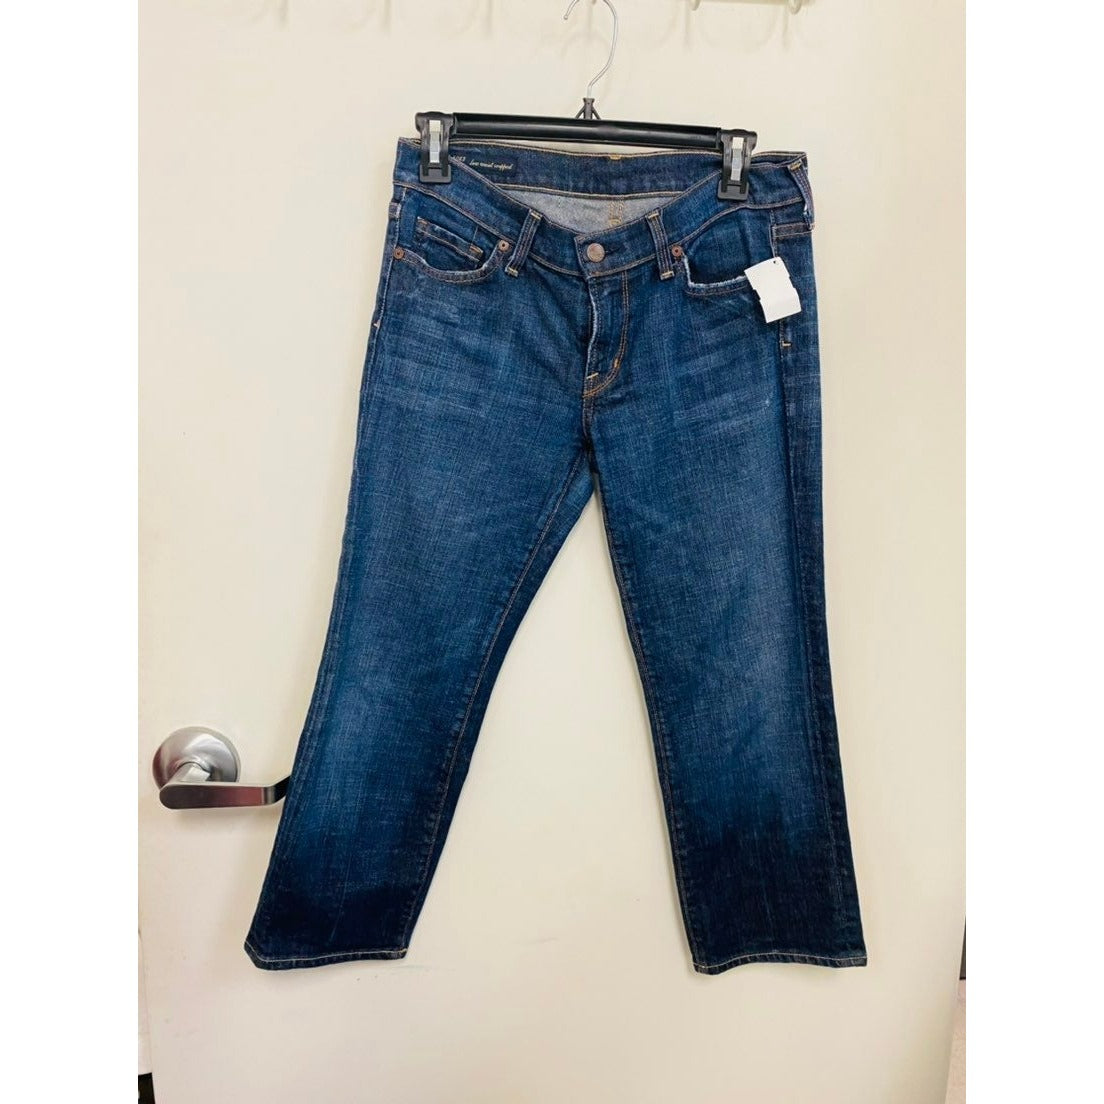 Citizens of humanity cropped jeans size 28